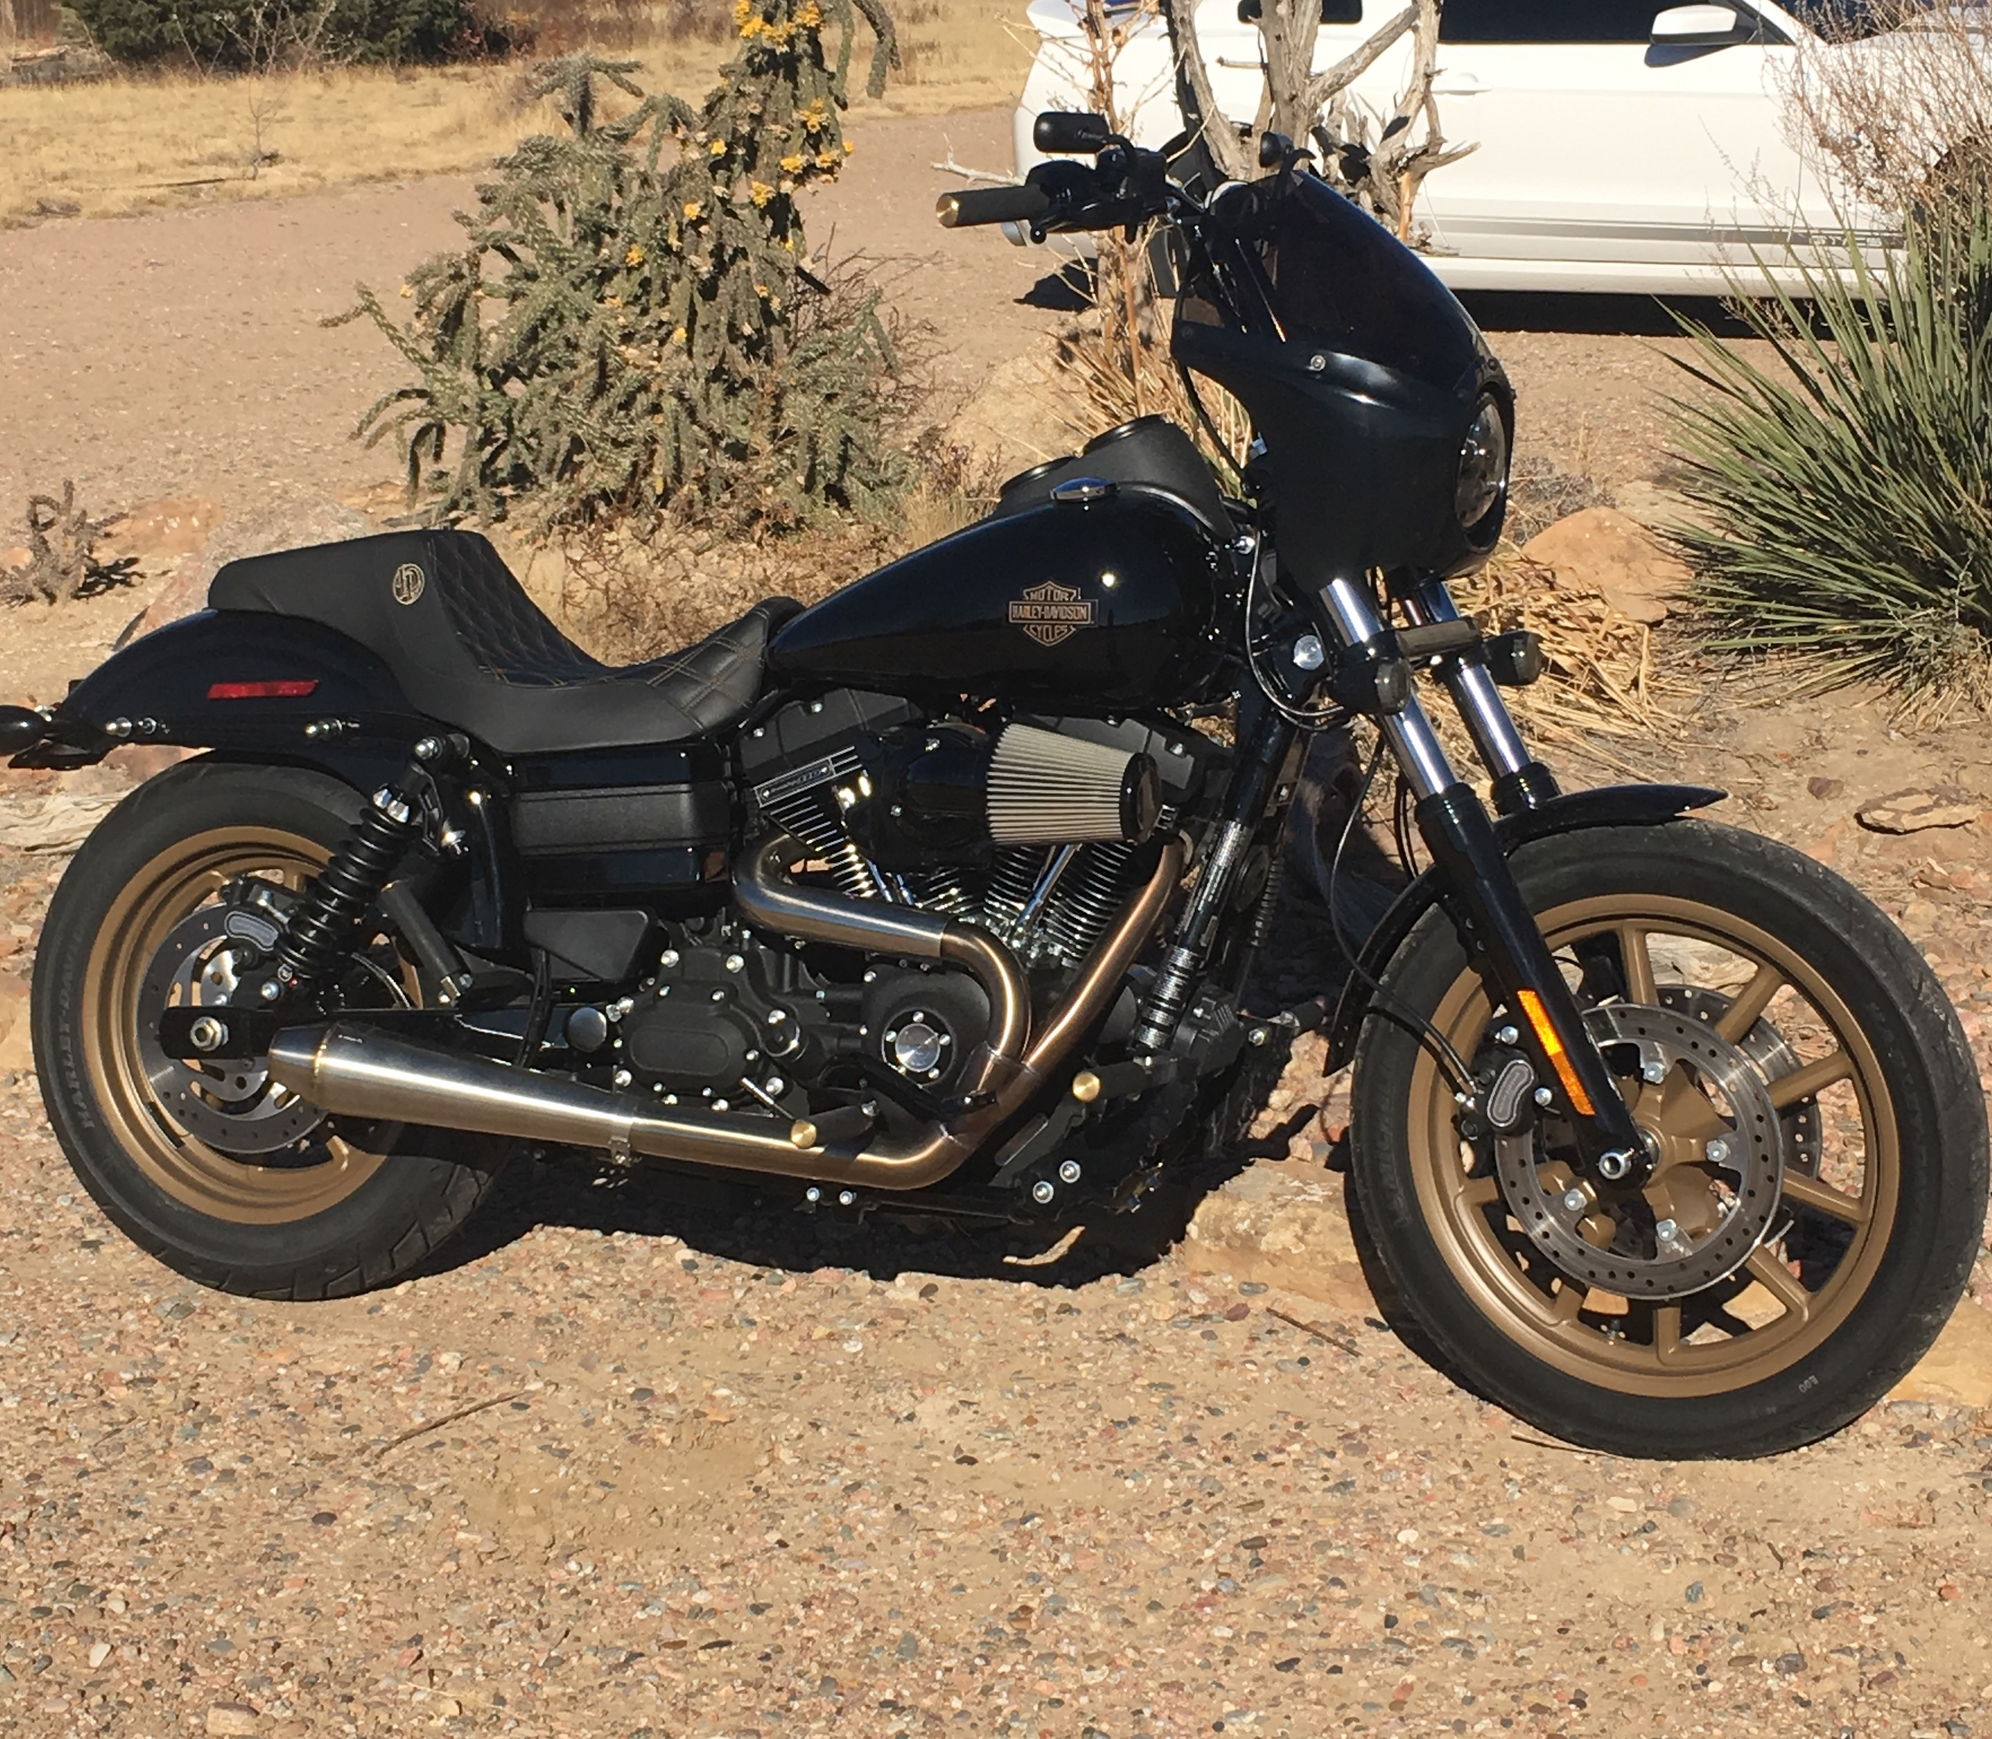 New Low Rider S - Page 190 - Harley Davidson Forums